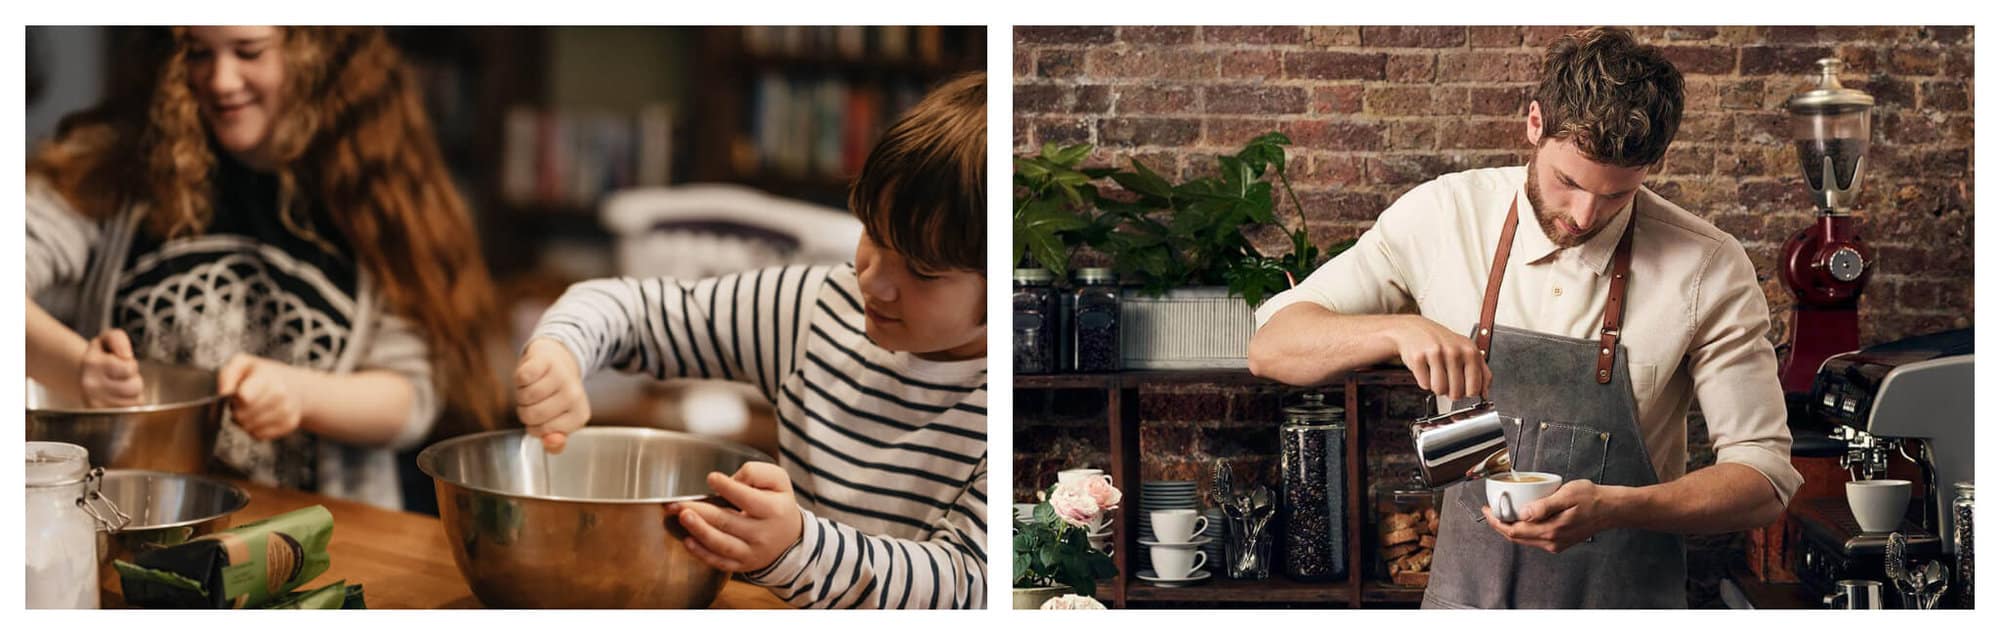 Left: Children stirring their silver bowls at their cooking class. Right: A male barista in a gray apron and white long sleeved shirt pours milk in a cup of coffee.